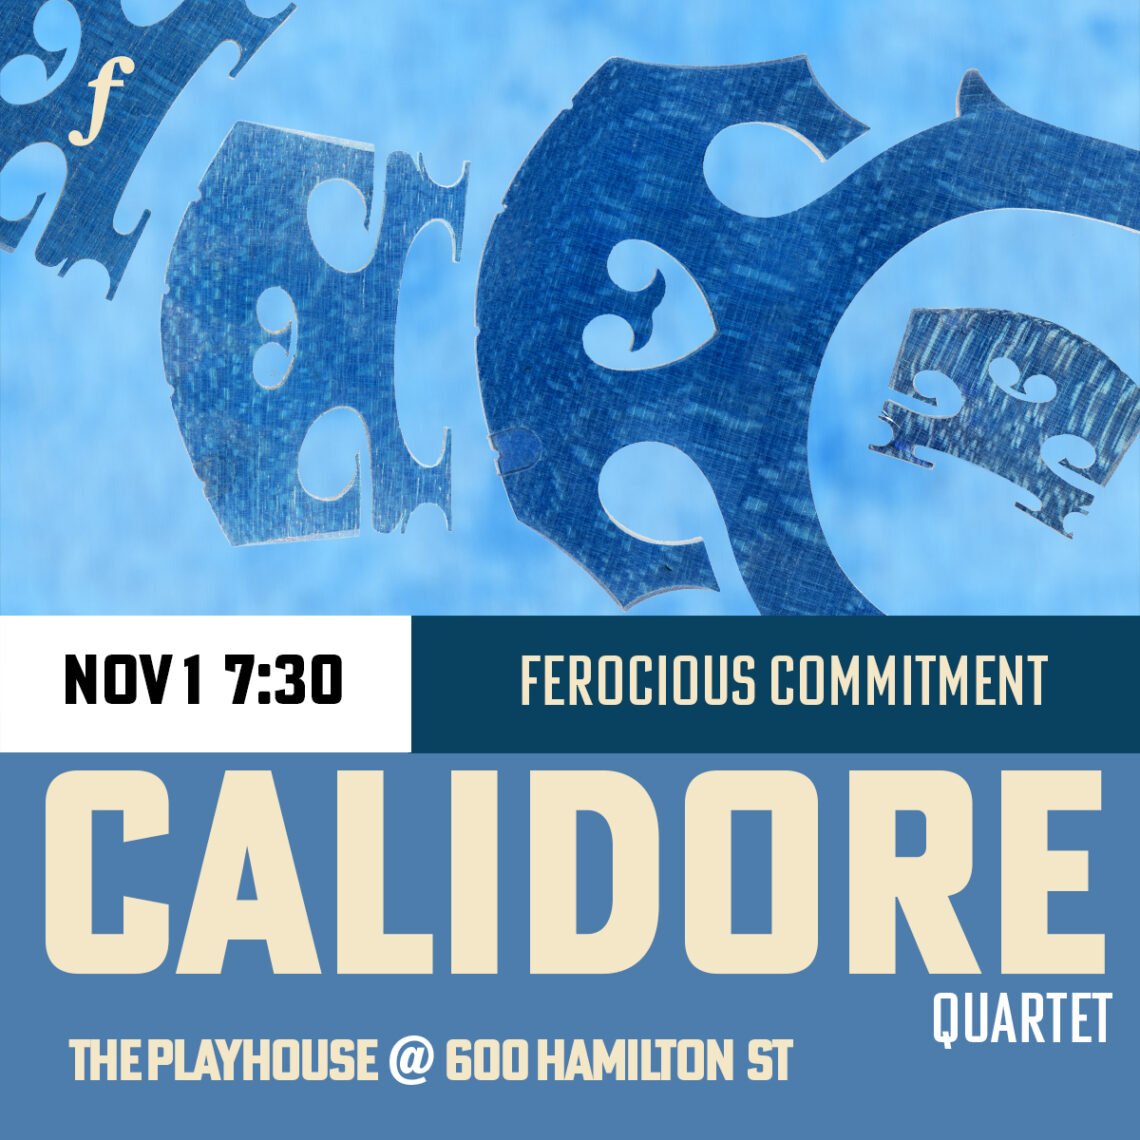 We are Delighted to Welcome the Calidore Quartet to Vancouver